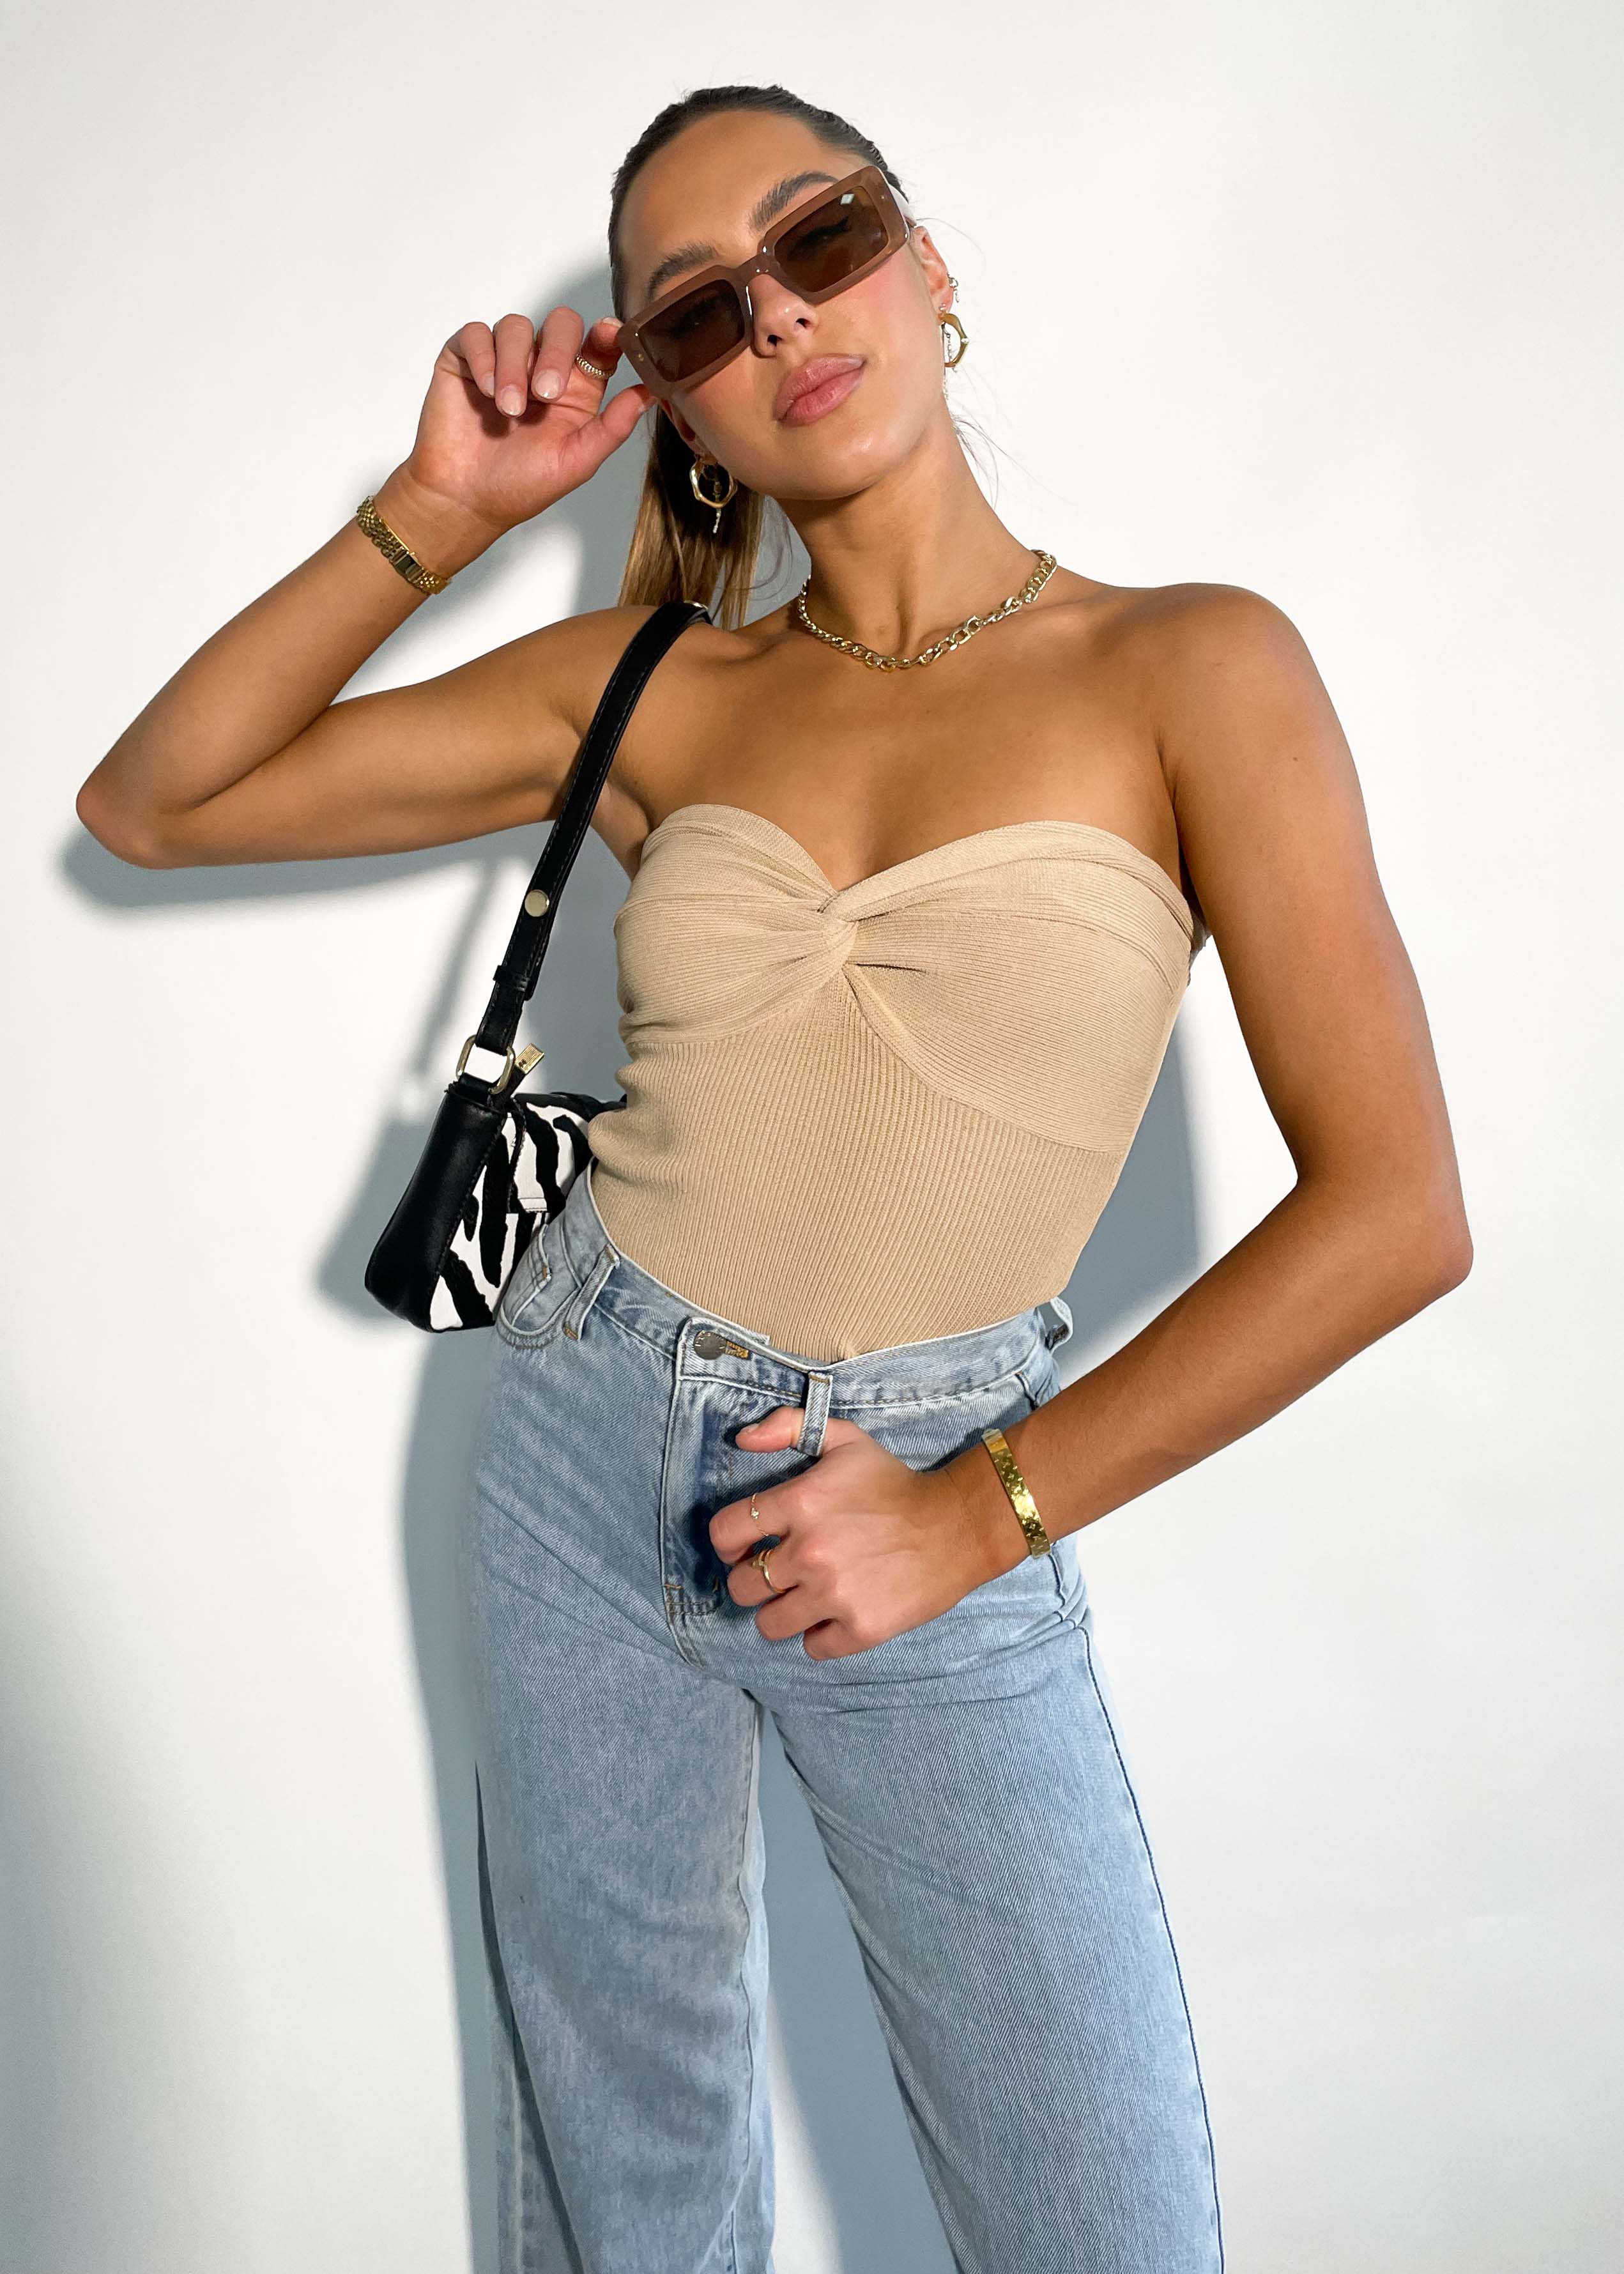 Emilia Top - Sweetheart Ribbed Knit Strapless Top in White